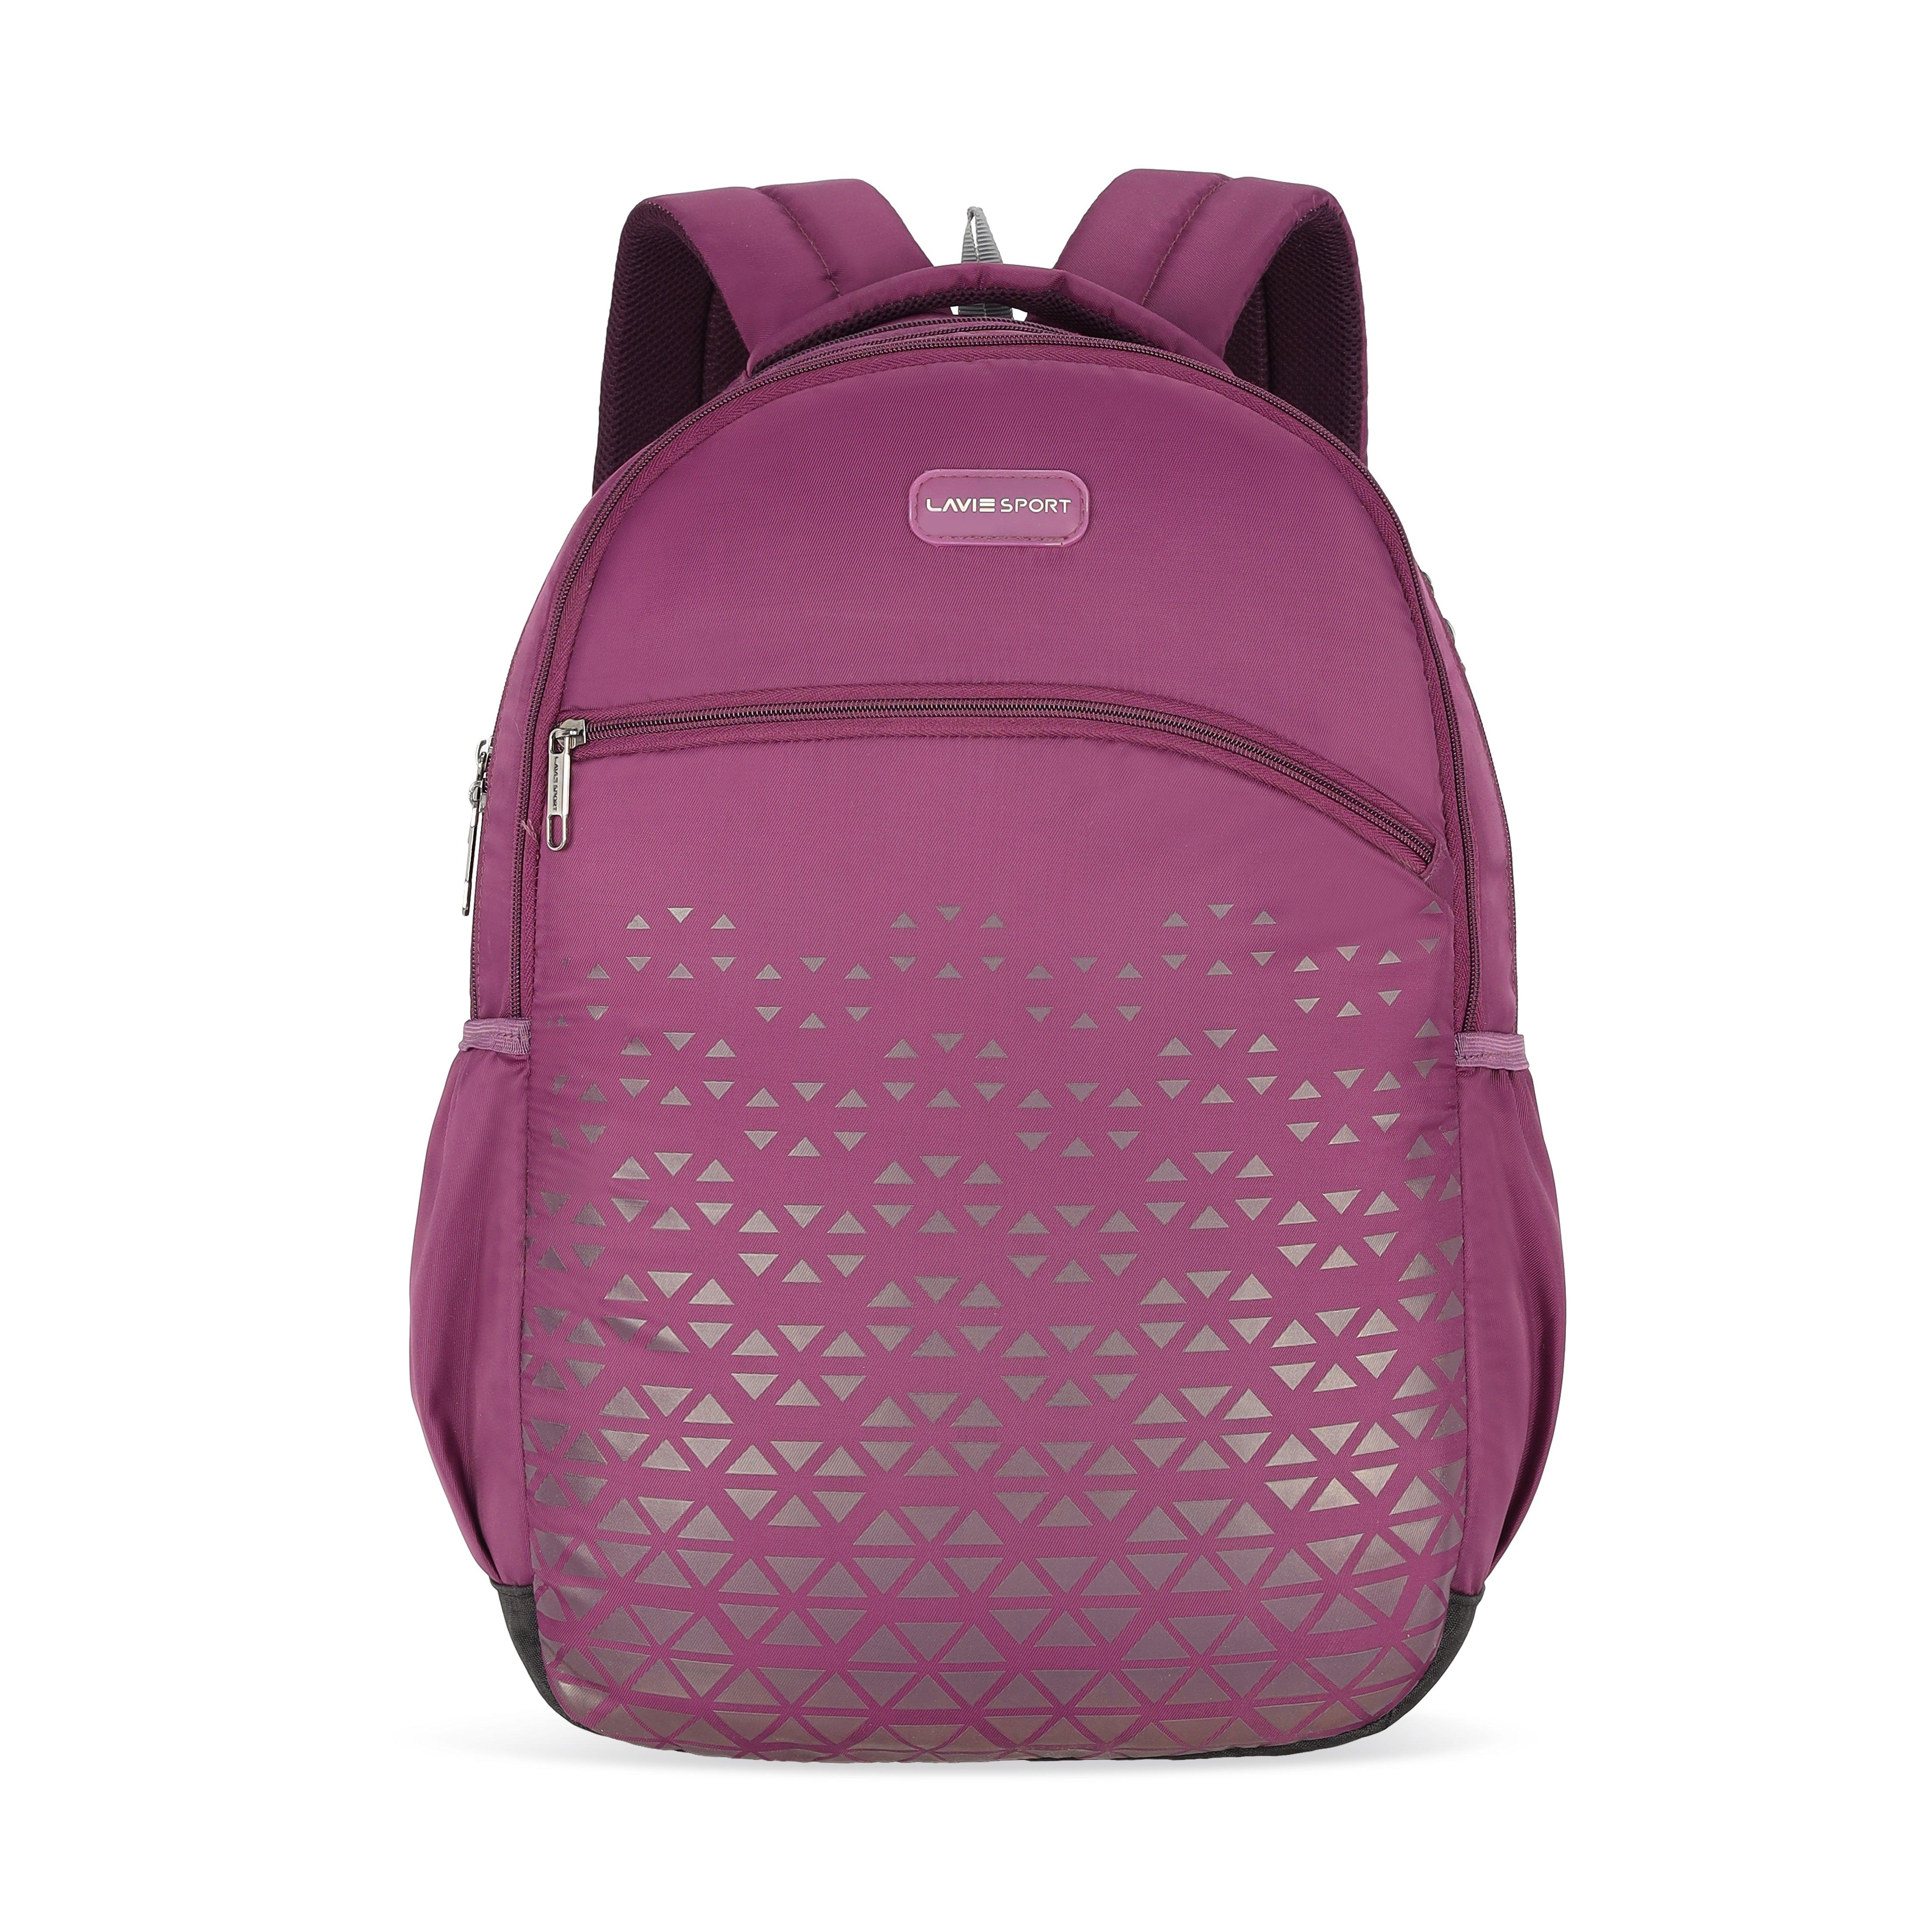 Backpack For Daycare|unisex Pink Purple High School Backpack - Polyester,  Zippered, Applique Decor